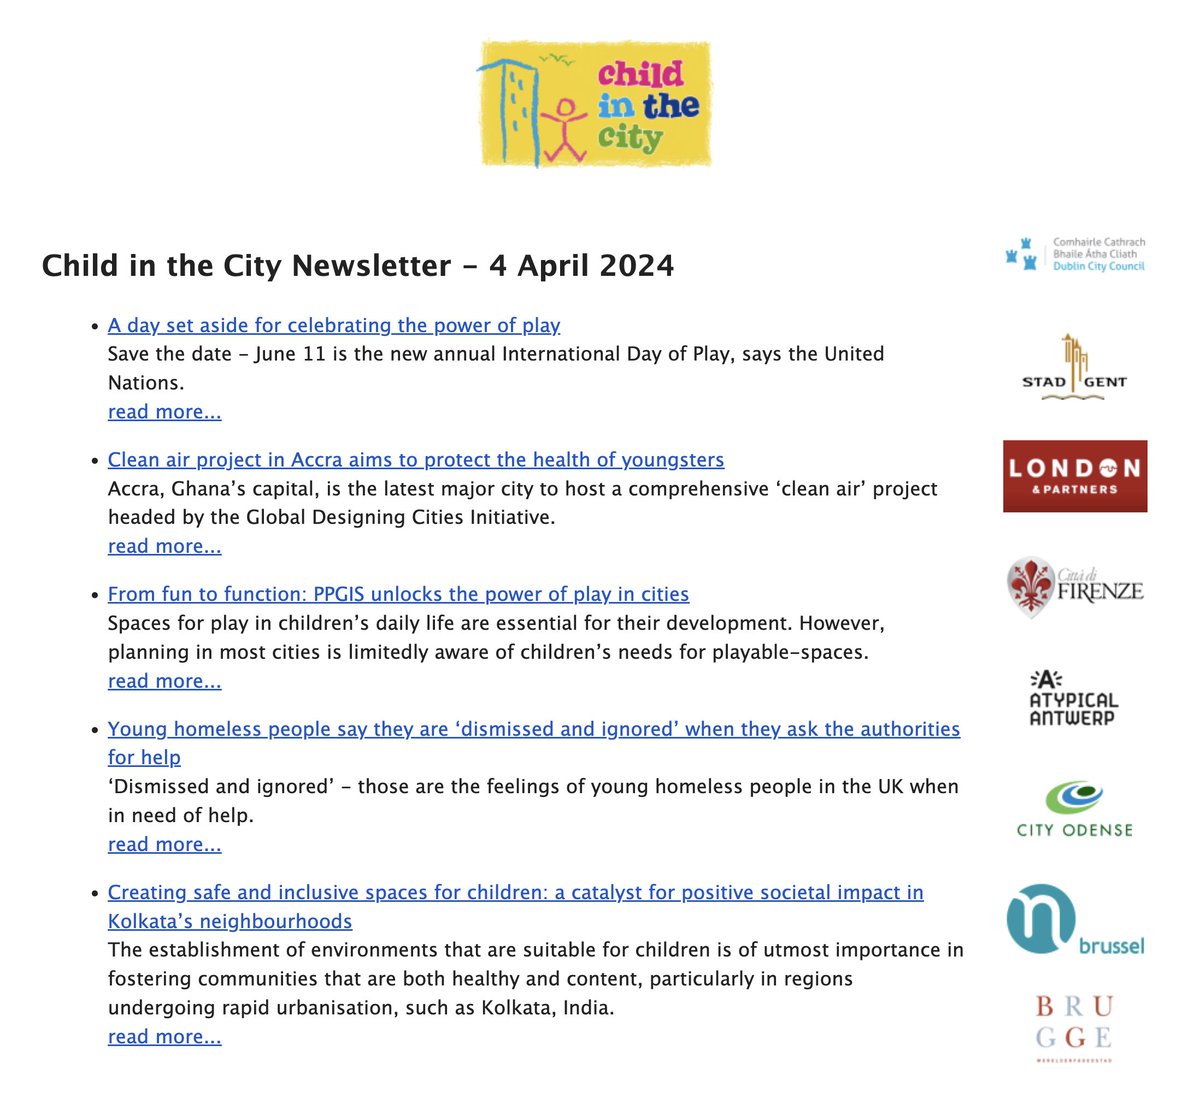 Hi everyone, this week's newsletter includes details of the new @UN-endorsed International Day of Play on 11 June, and how Accra, the capital of Ghana, is the latest major city to host a 'clean air' project benefiting youngsters' health. Sign up at childinthecity.org